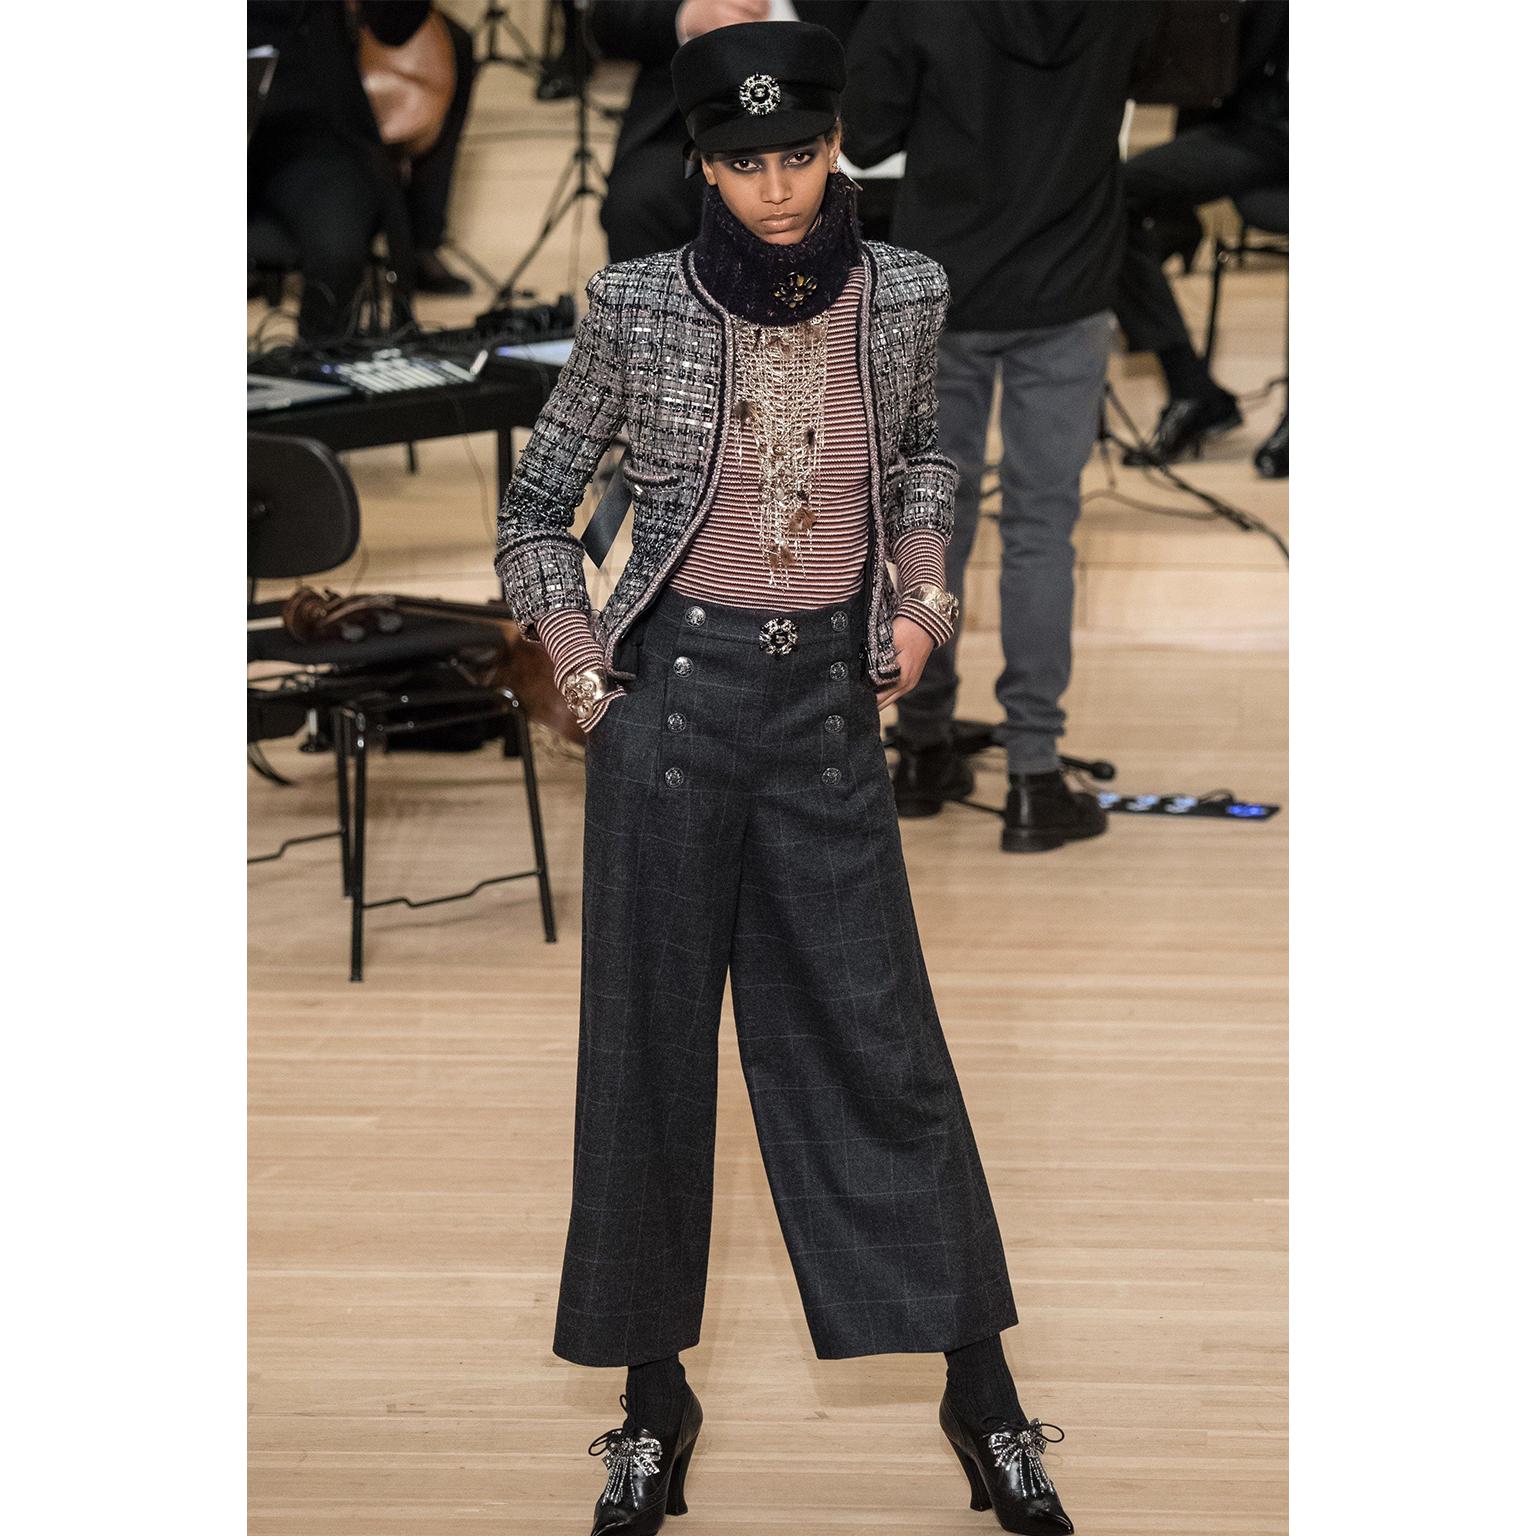 These are new with original tags Chanel Pre-Fall 2018 charcoal grey wool trousers with windowpane blue grid lines throughout. The front of the pants have a sailor style button panel that conceals the front zipper opening and a hook and eye closure.